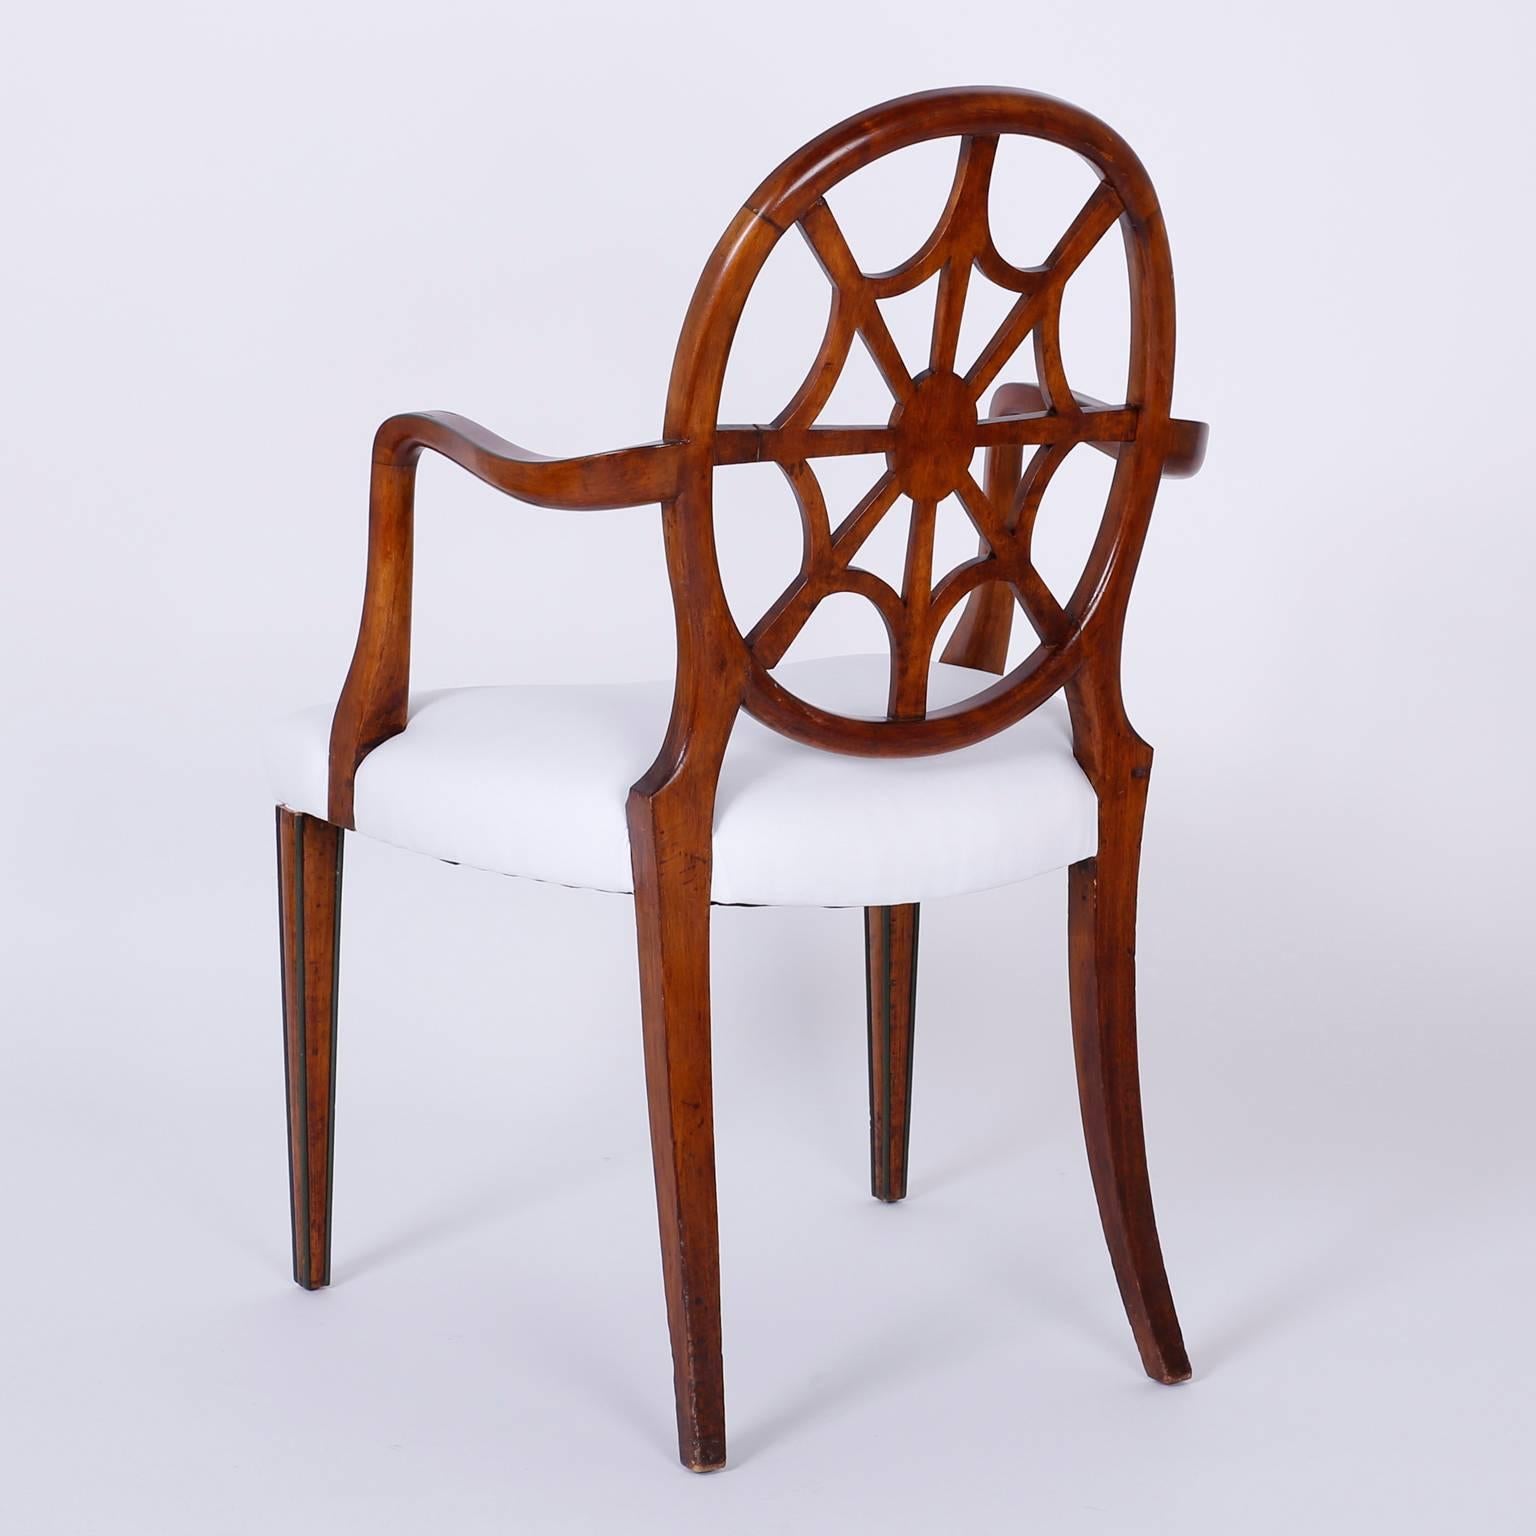 spider chairs for sale